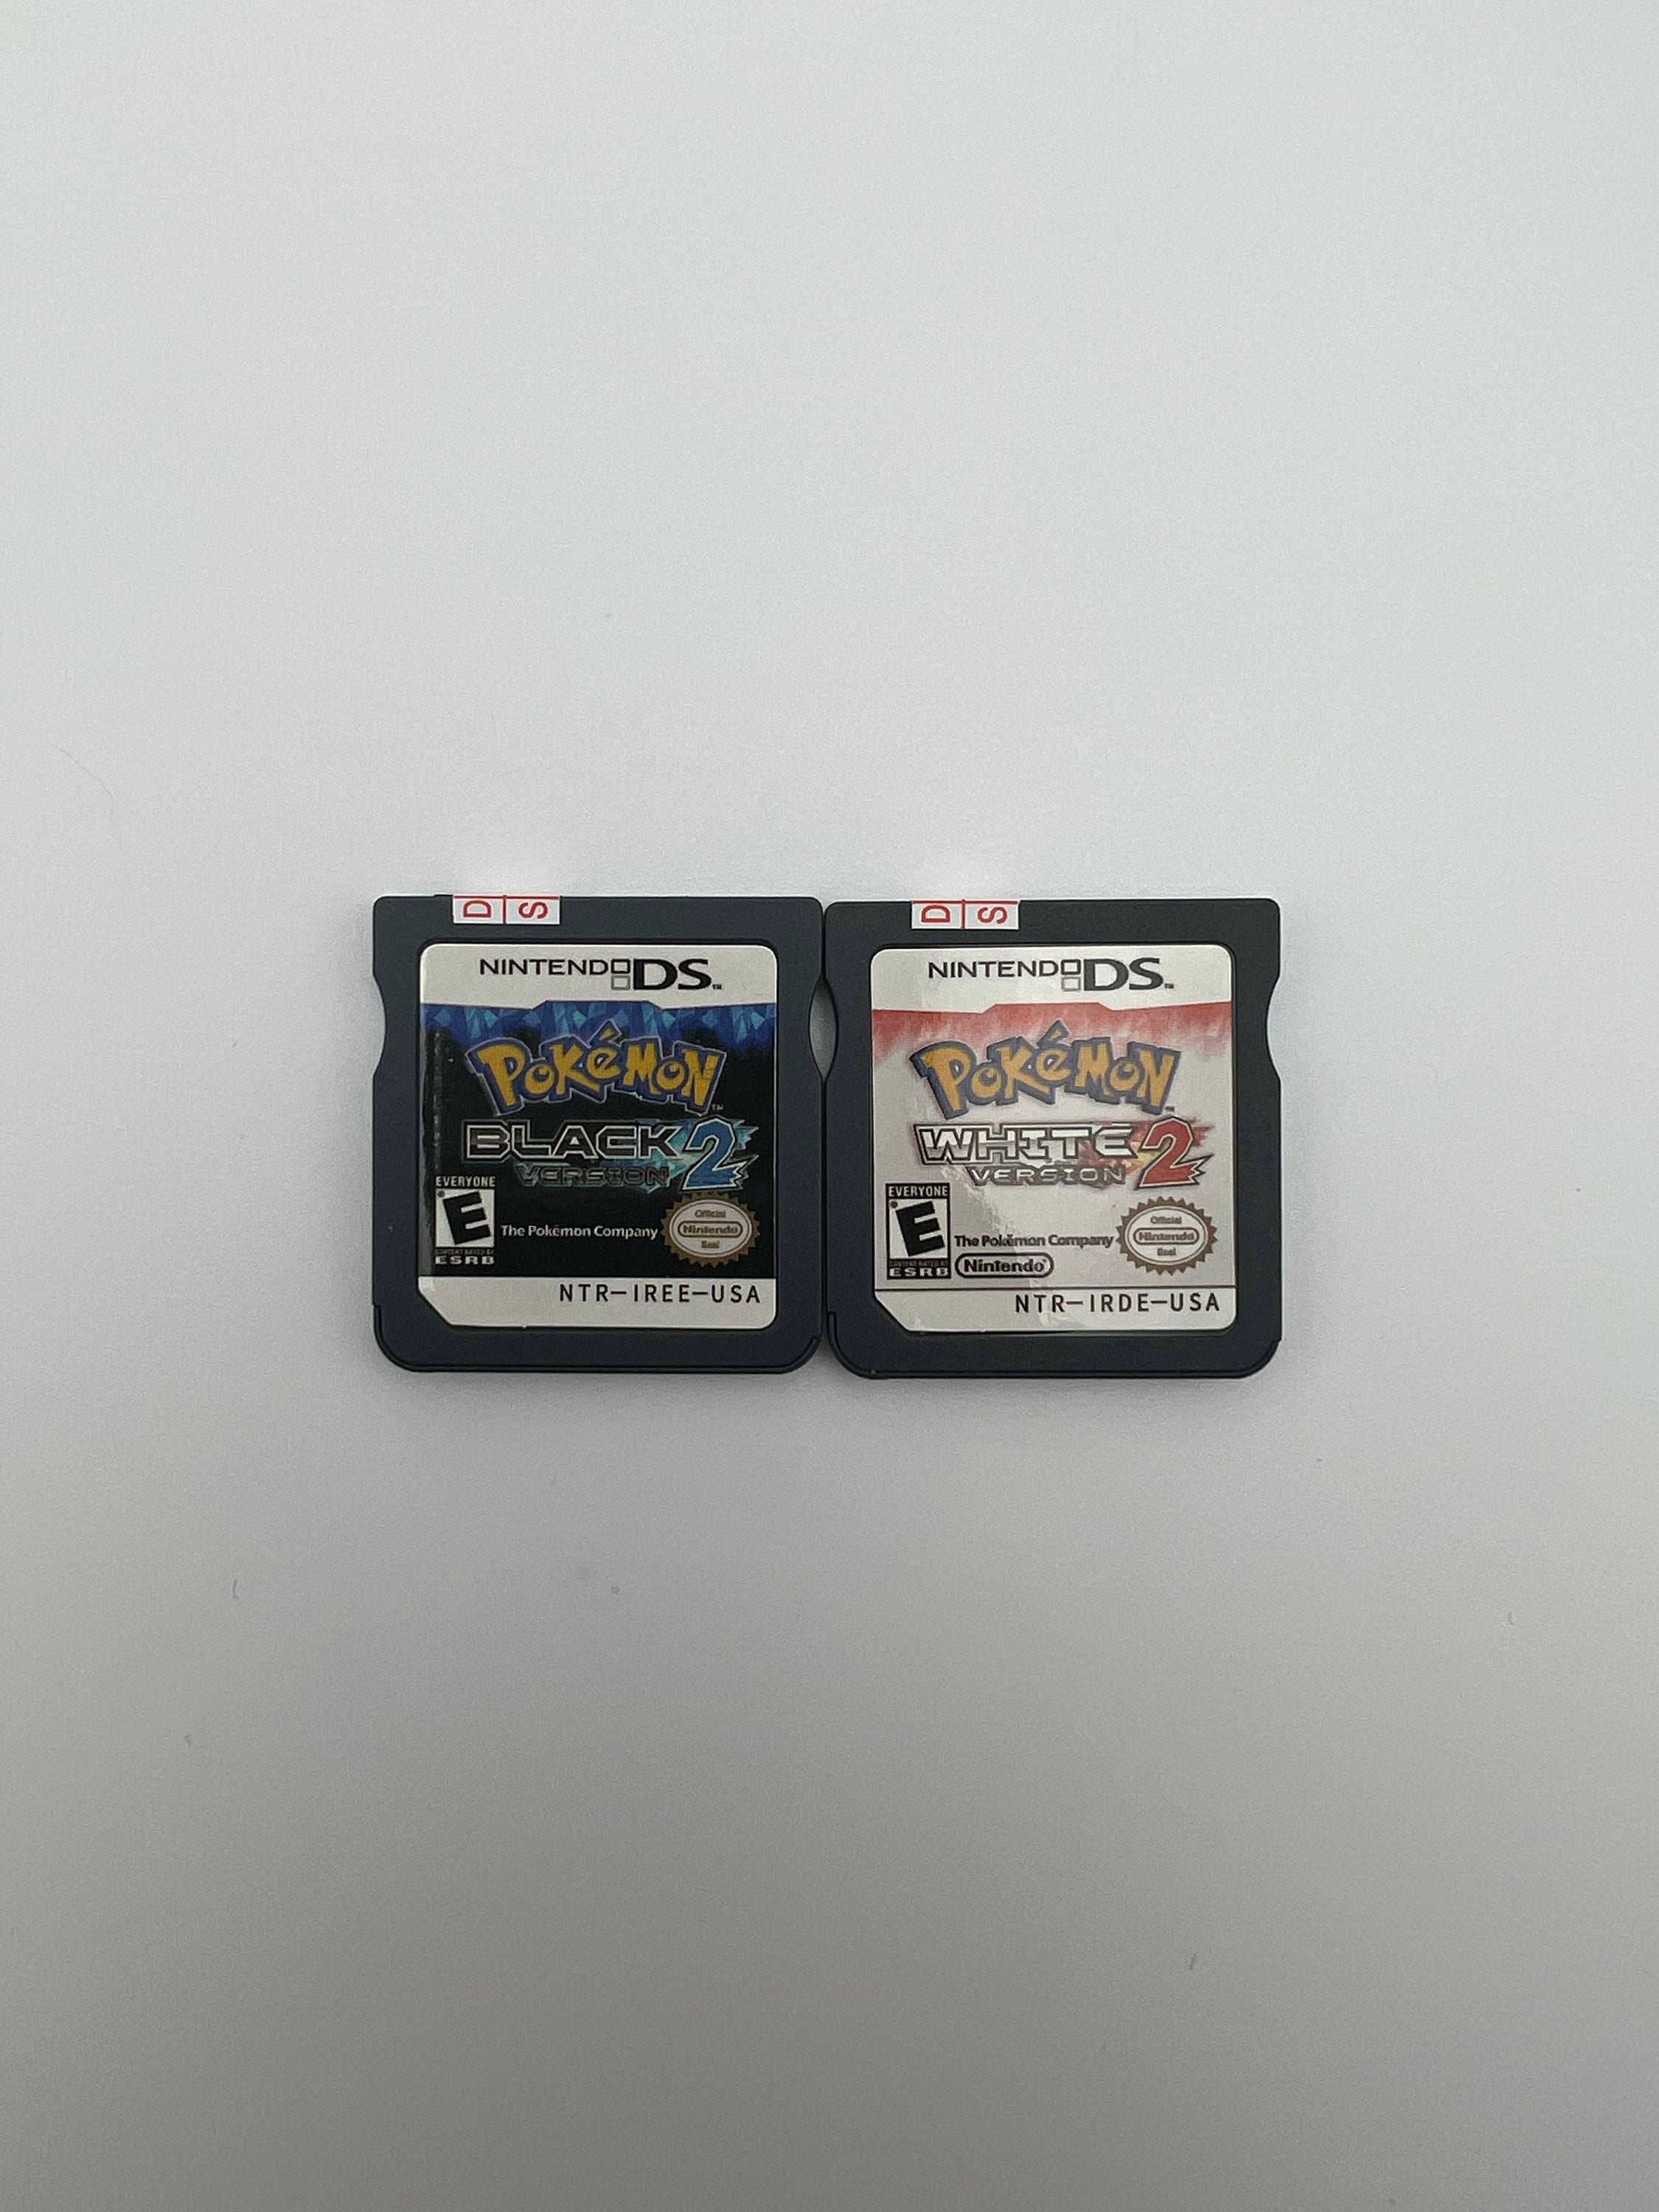 Pokemon Heart Gold Case ONLY!! (DS) *CANADIAN VERSION*